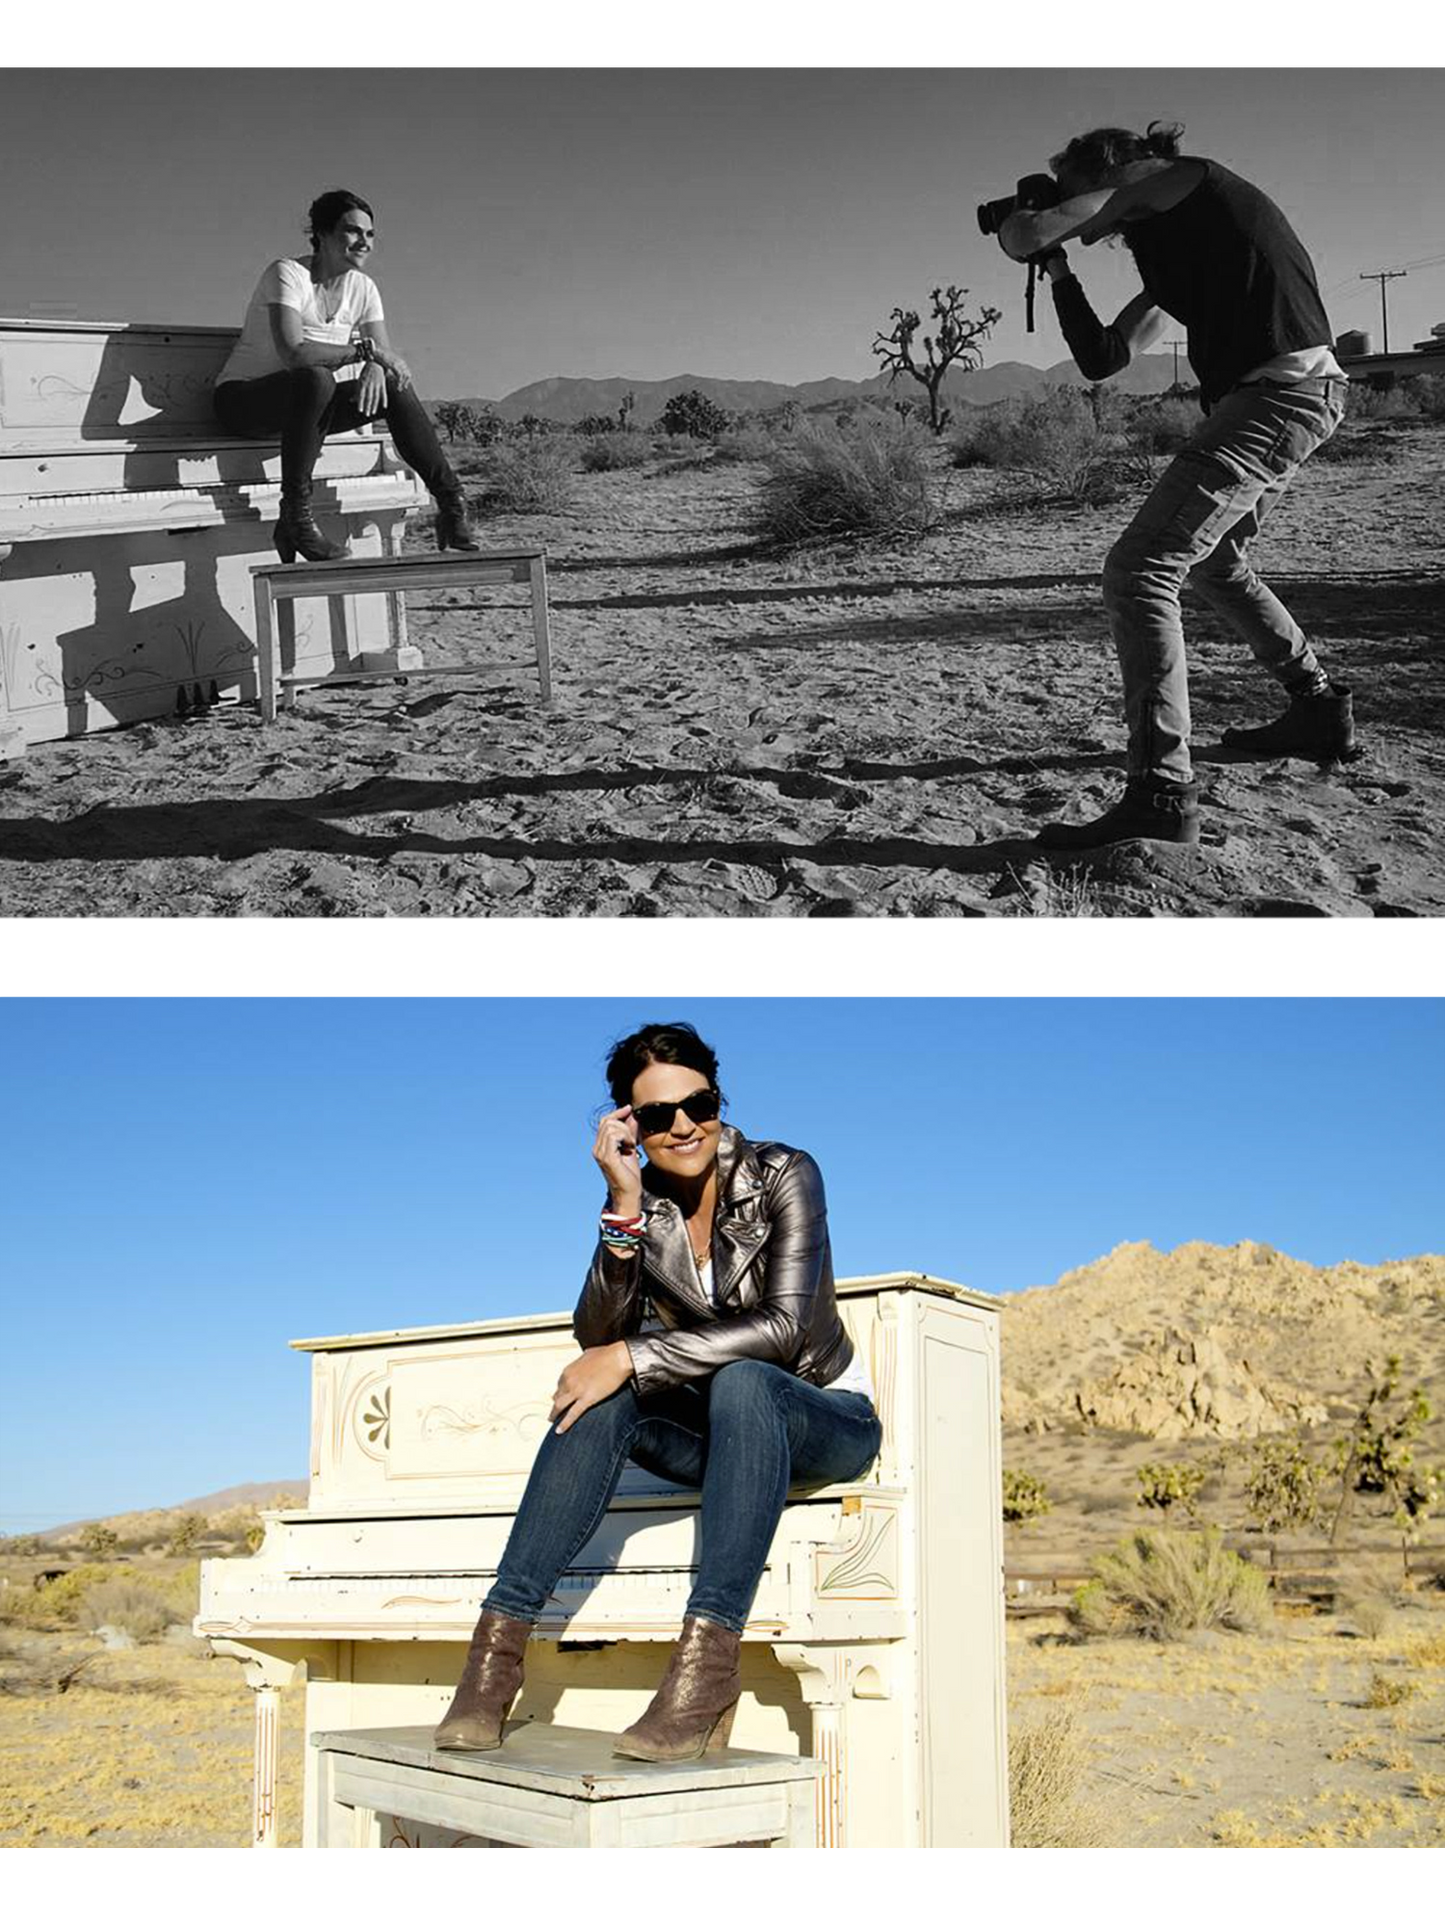 Fine Art Portrait color photograph Leslie Cours Mather sitting on weathered piano in desert with bts photo of Mark Maryanovich photographing her placed above